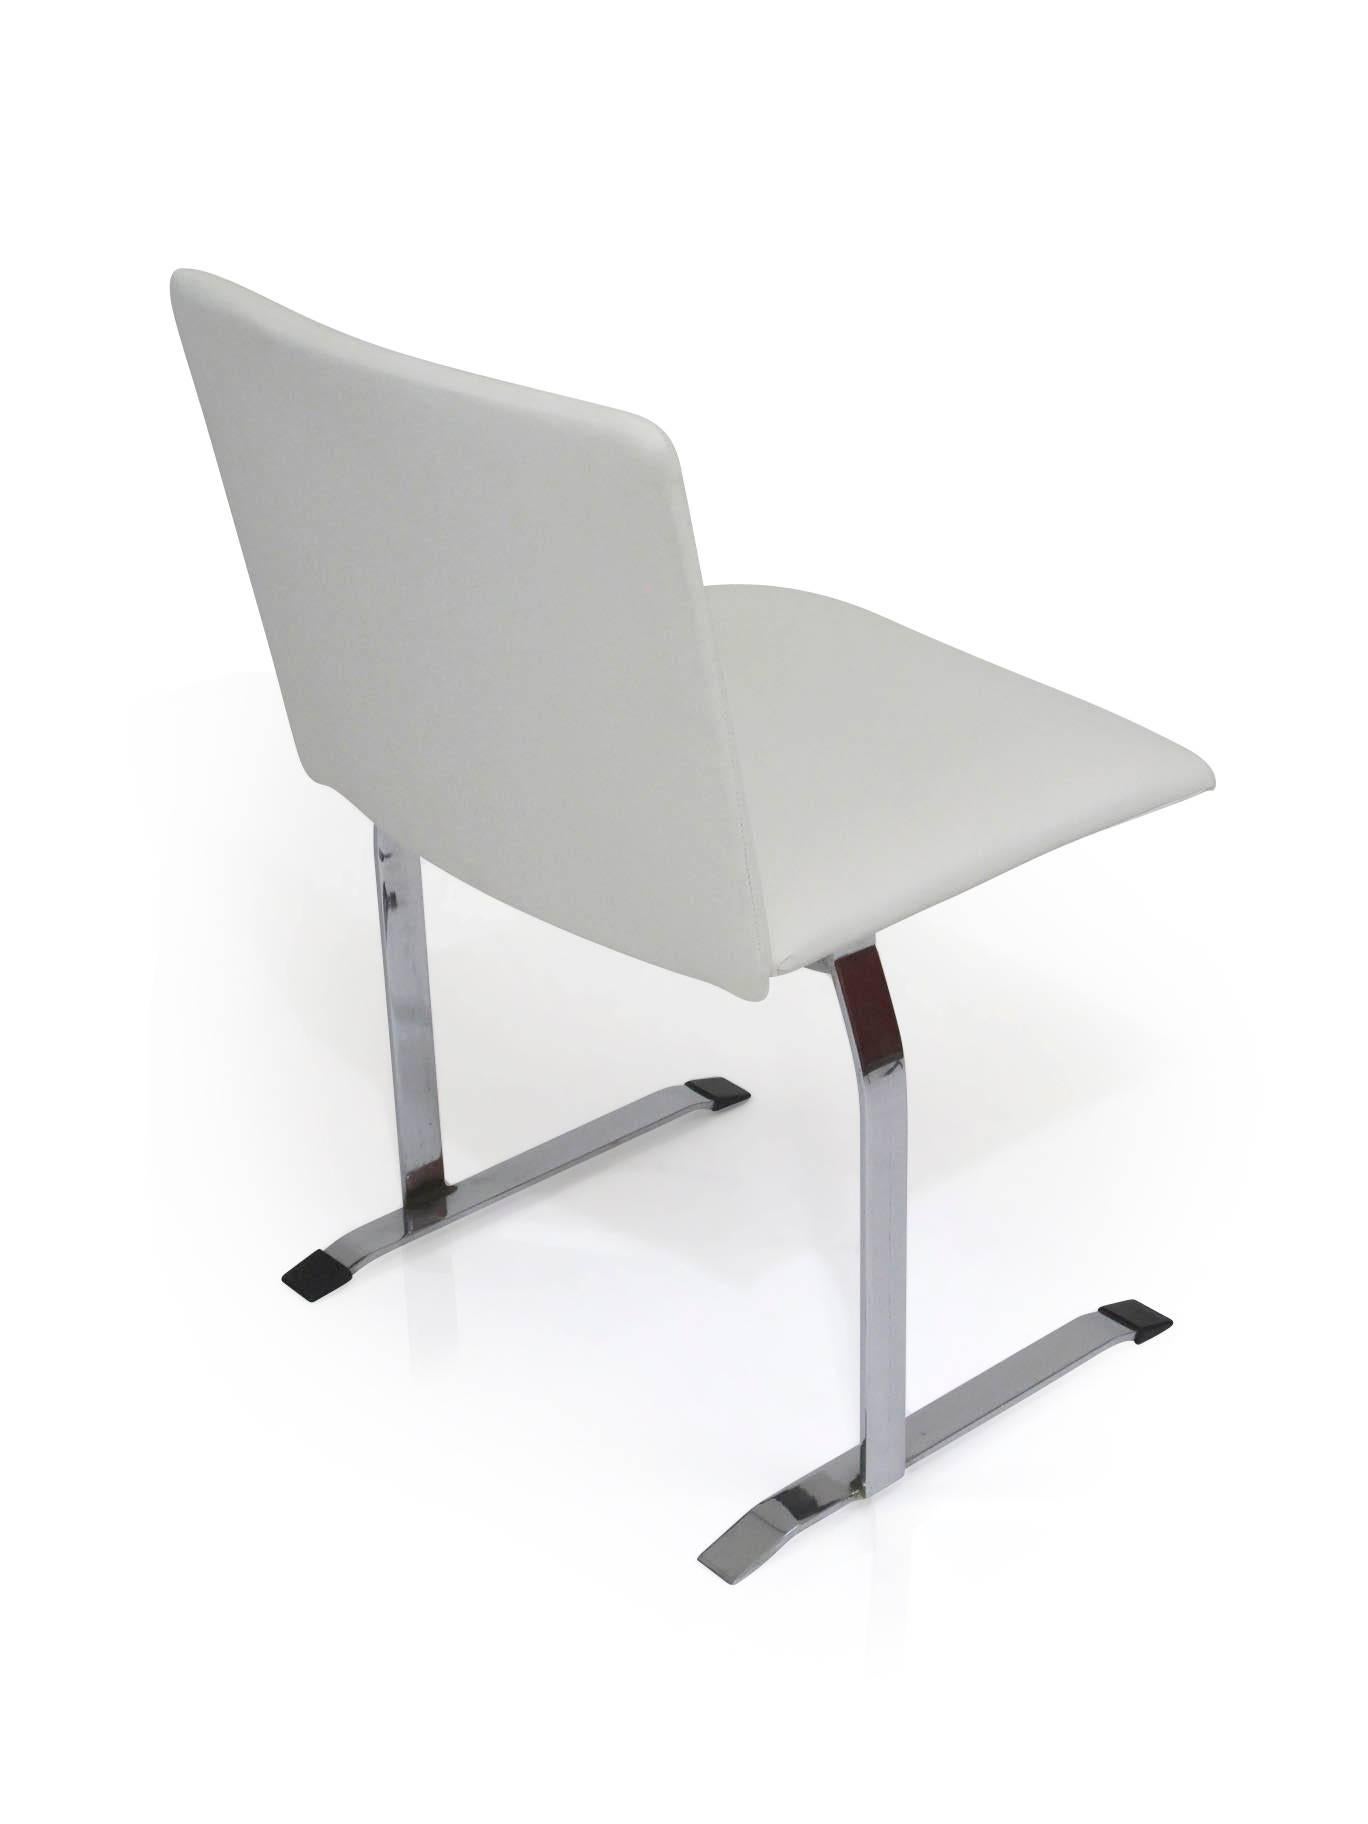 Giovanni Offredi for Saporiti Dining Chairs in White Vinyl on Chrome Steel Frame 1